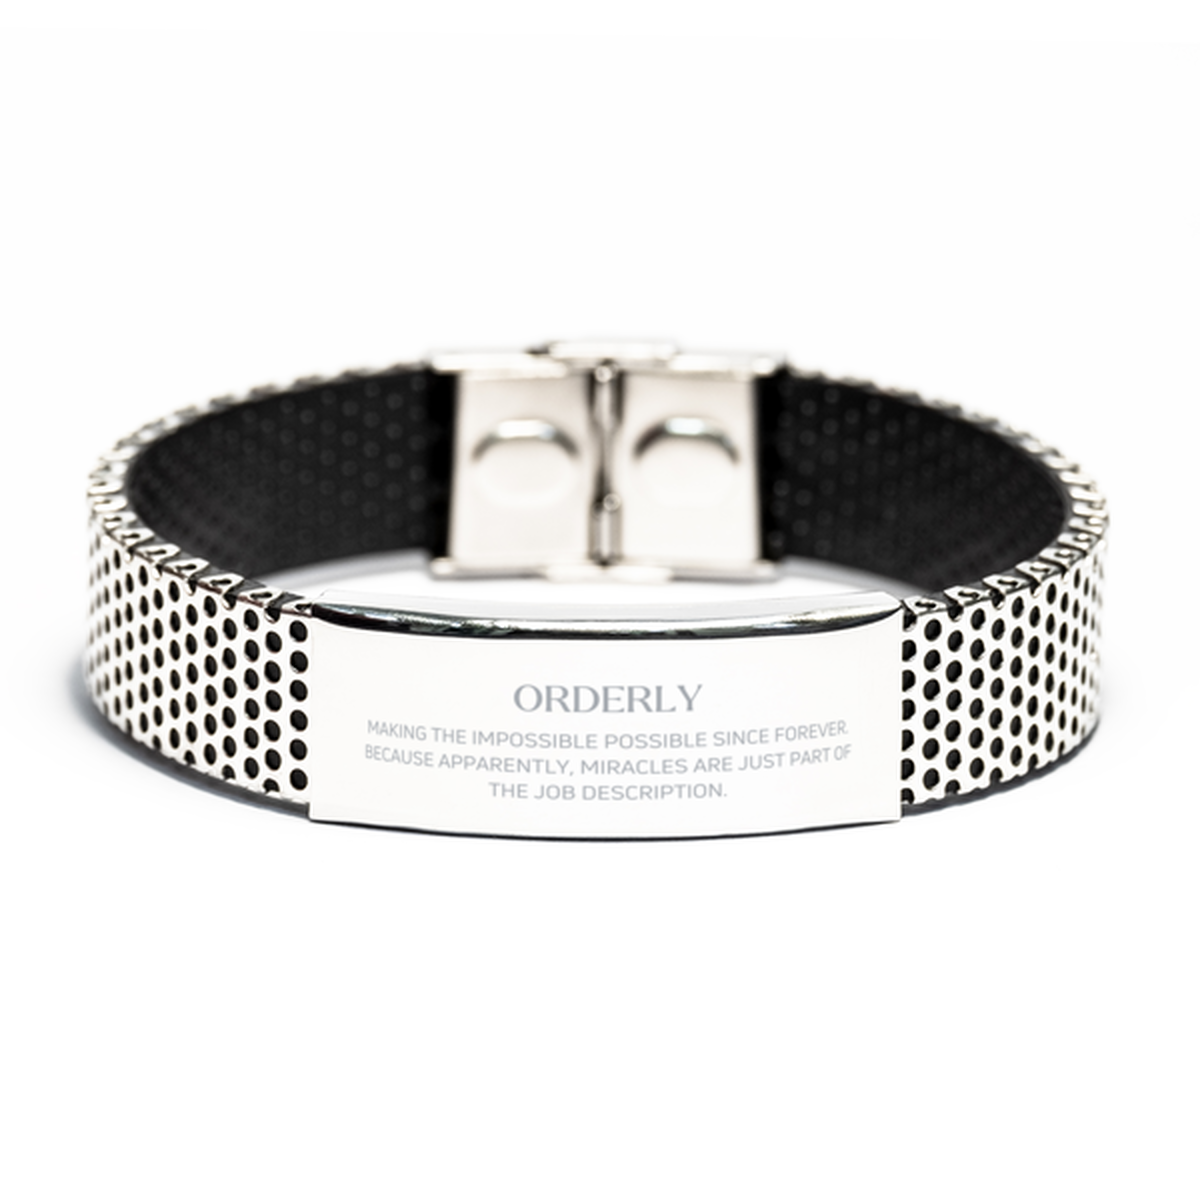 Funny Orderly Gifts, Miracles are just part of the job description, Inspirational Birthday Stainless Steel Bracelet For Orderly, Men, Women, Coworkers, Friends, Boss